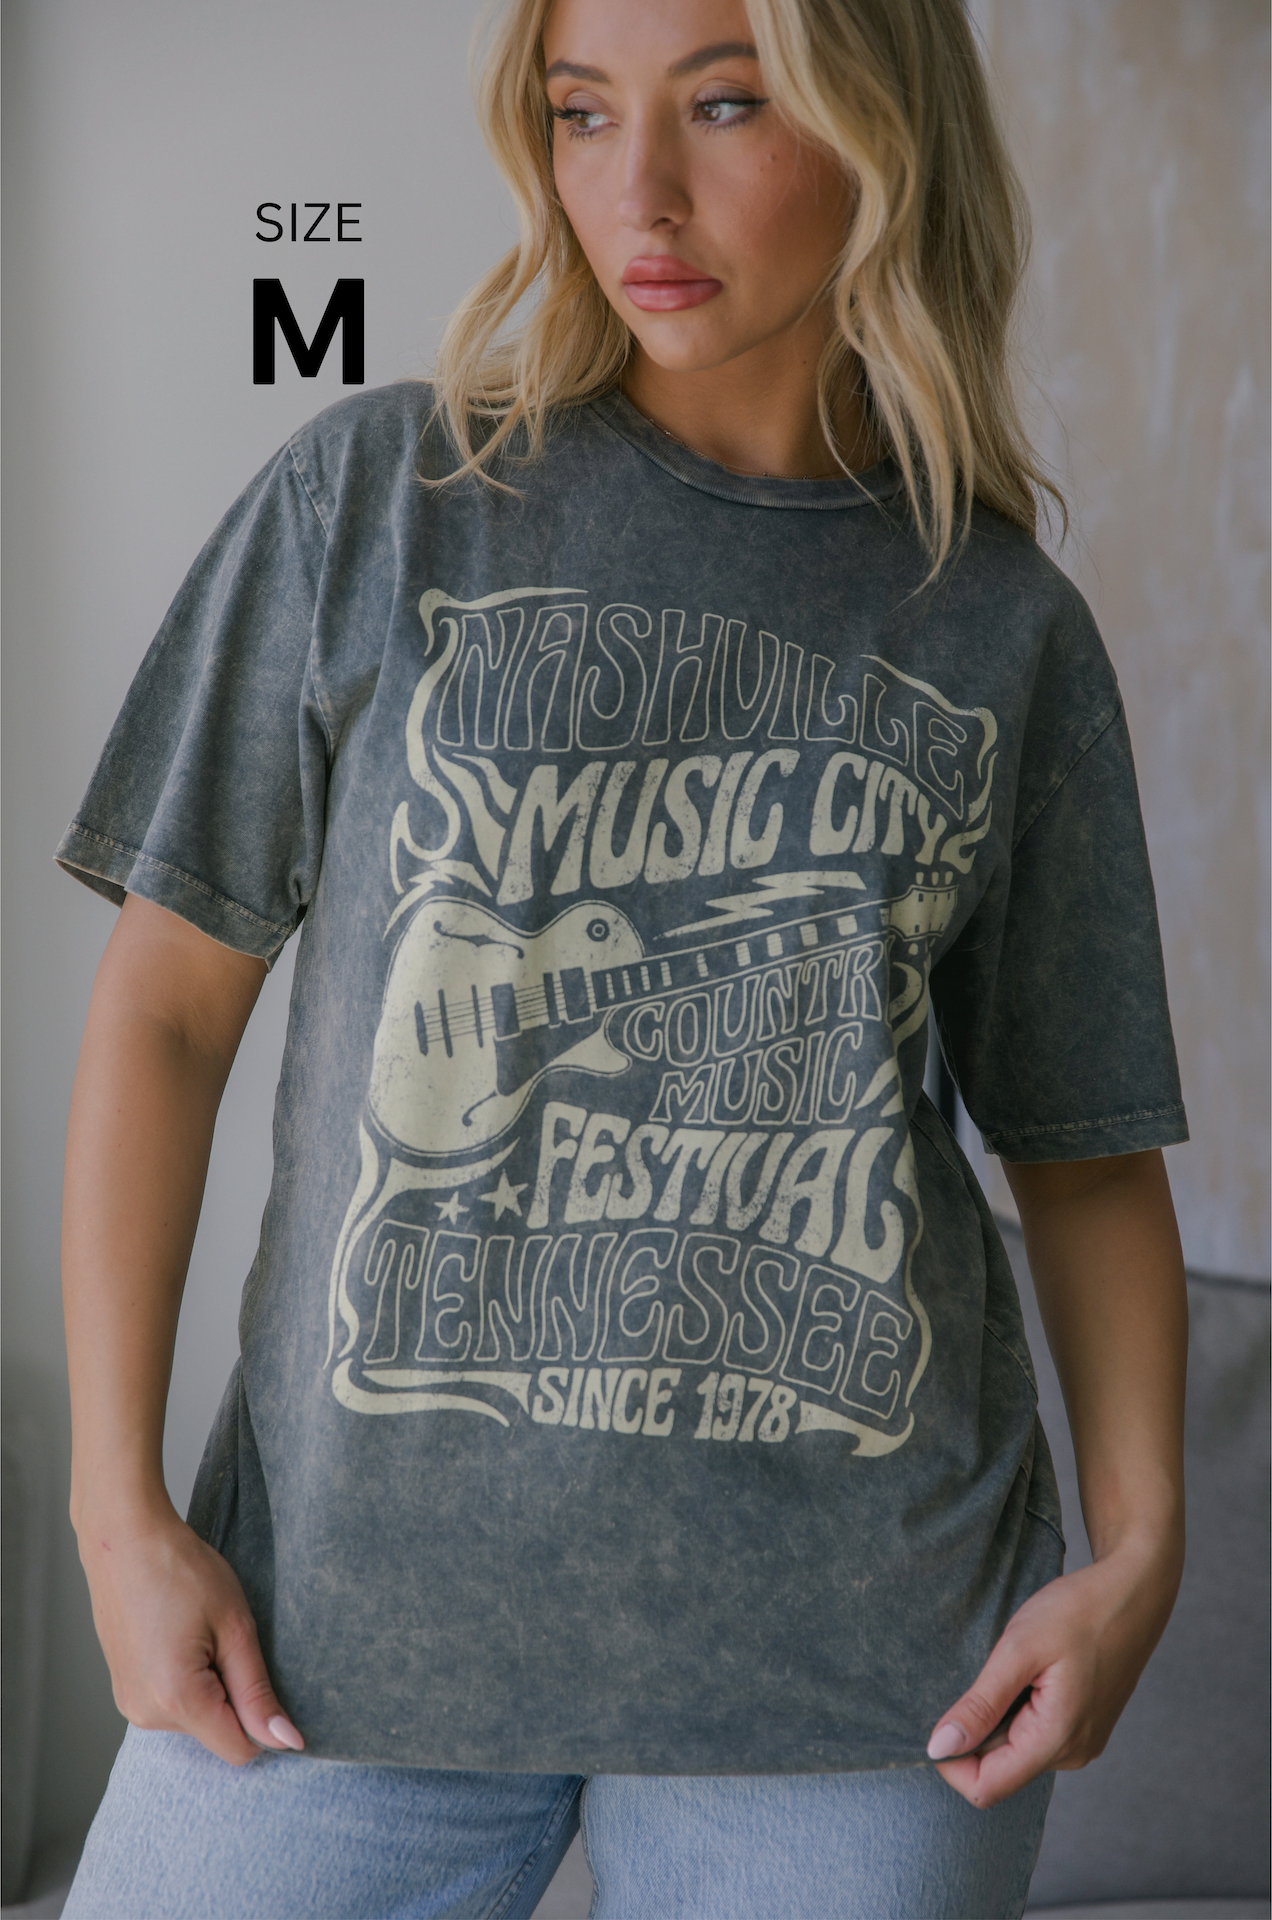 Nashville music city country music festival Tennessee since 1978 graphic tee